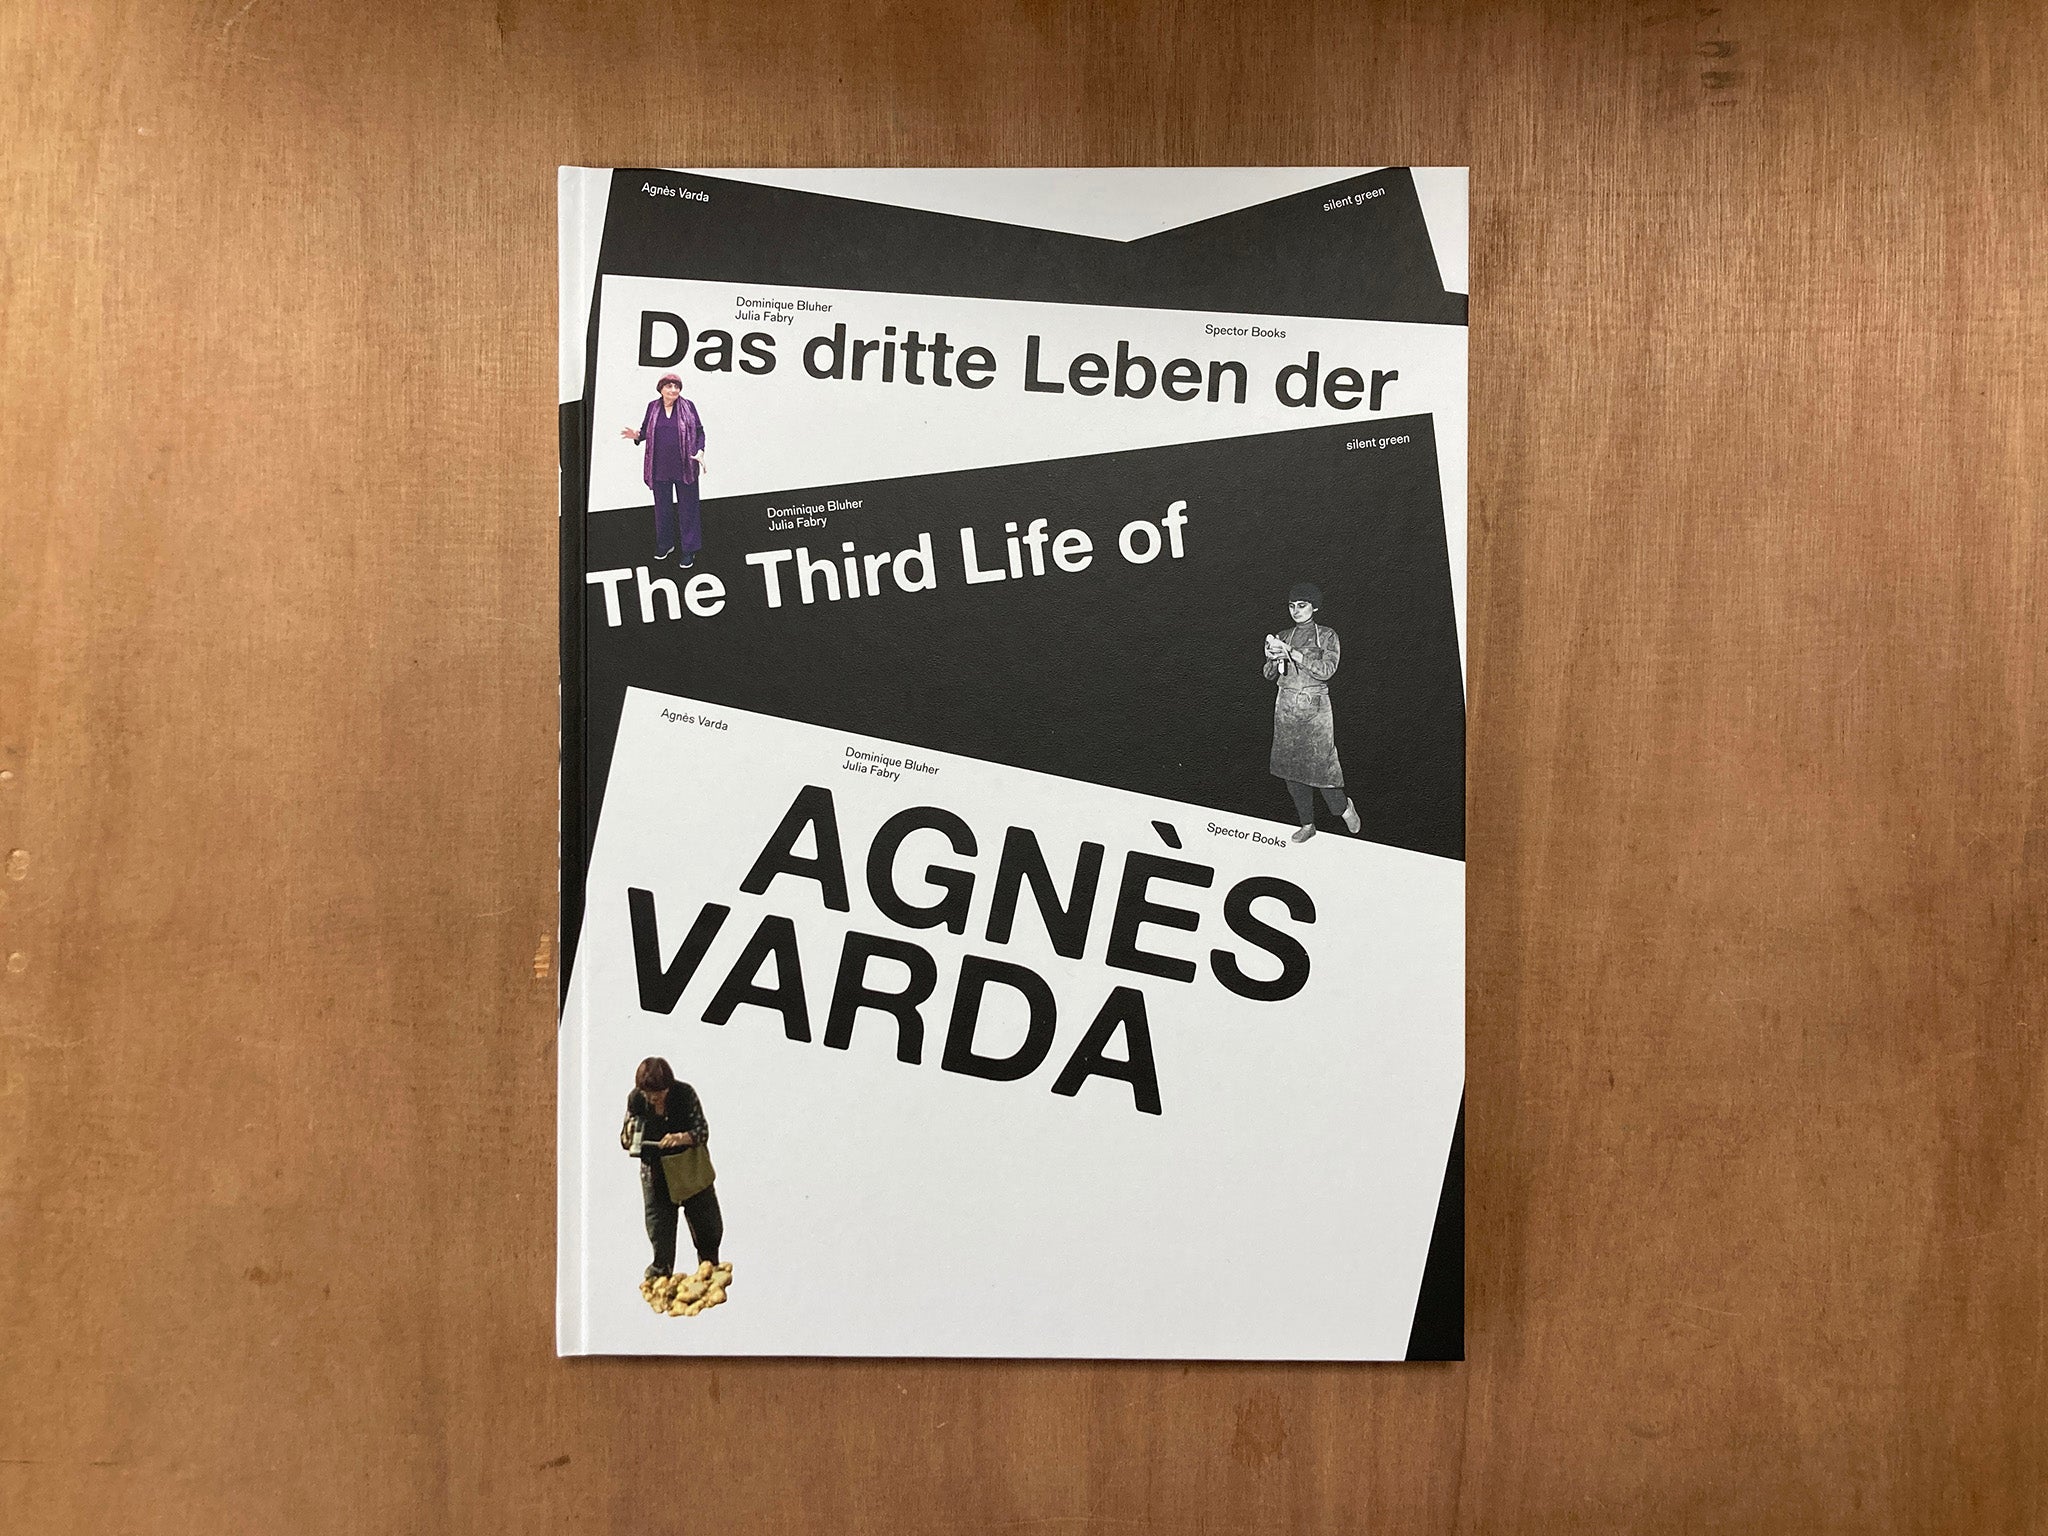 THE THIRD LIFE OF AGNÈS VARDA ed. Dominique Bluher and Julia Fabry